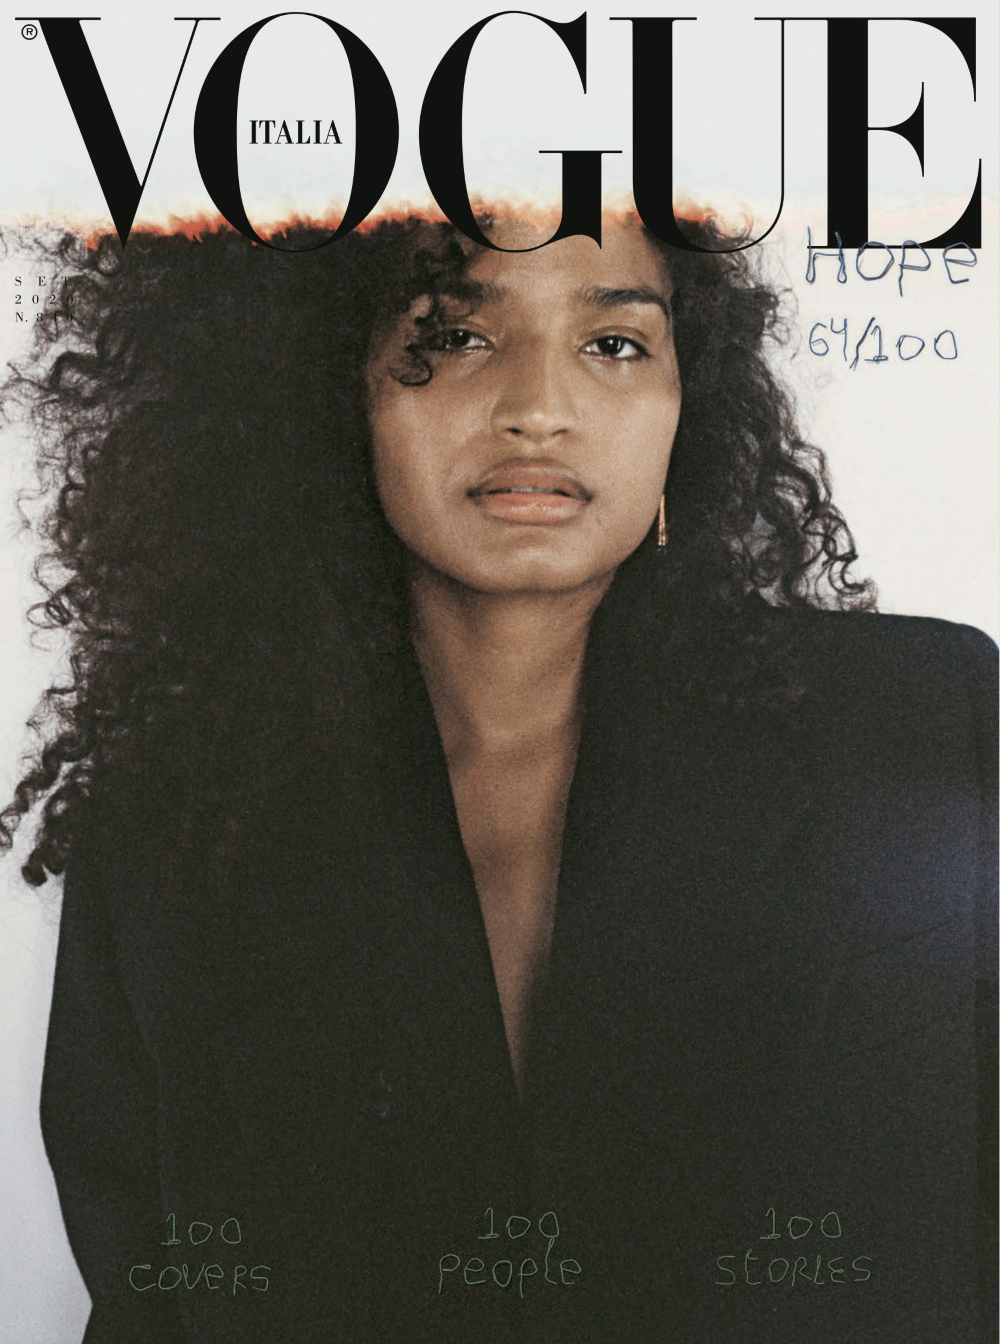 Vogue Italia taps 100 personalities for September 2020 issue